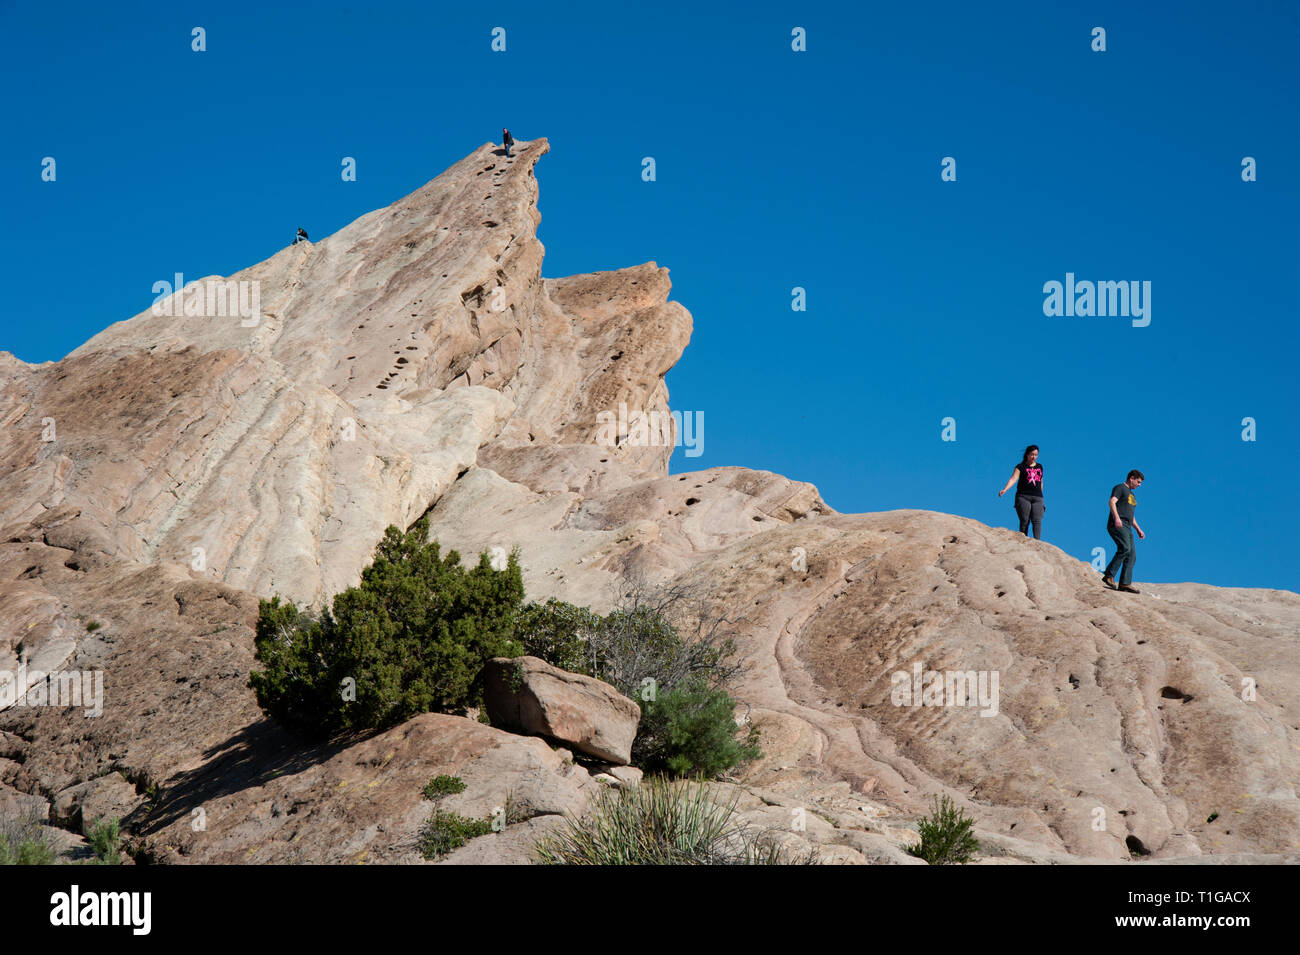 People visiting Vasquez Rocks near Agua Dulce in the Antelope Valley area of Southern California. Stock Photo